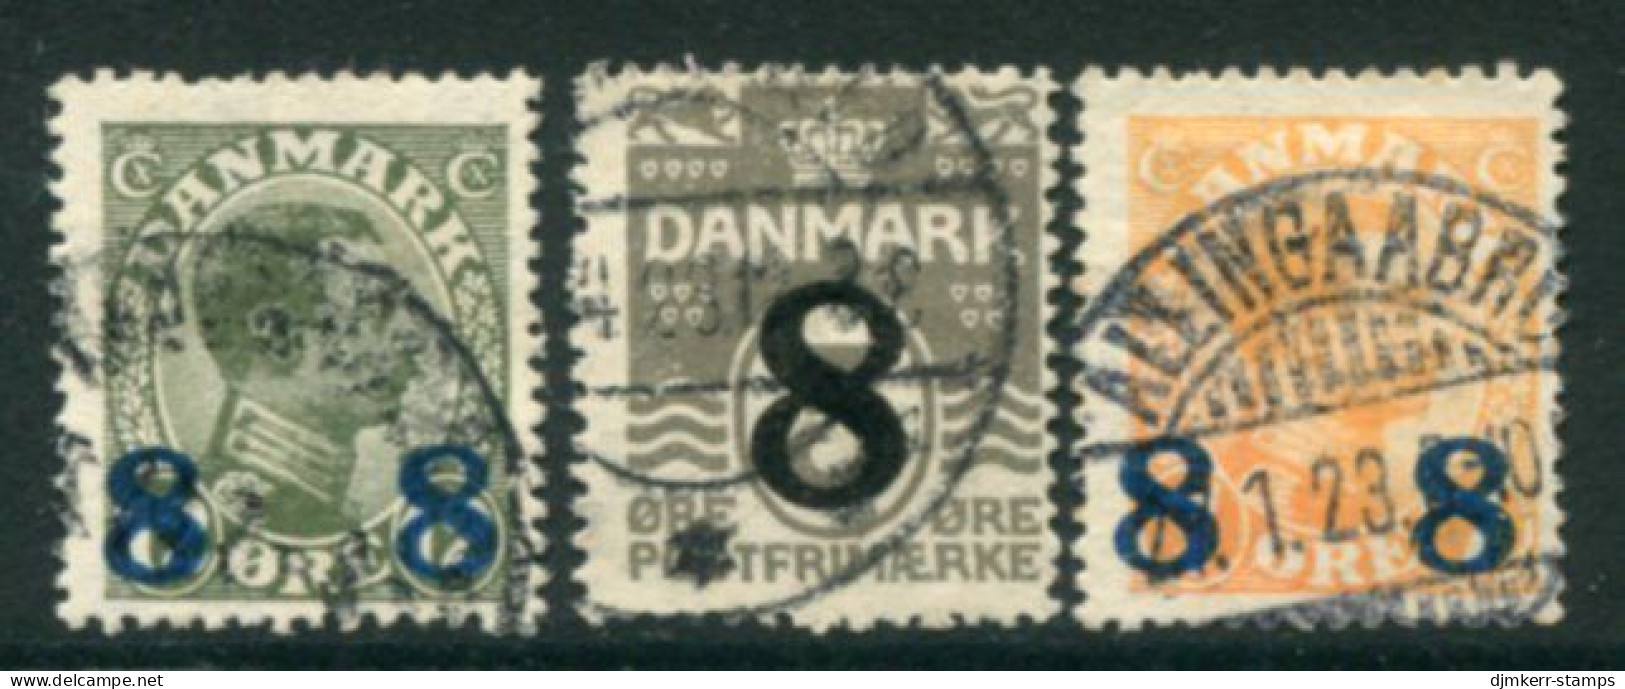 DENMARK 1921  8 Øre Surcharges Used.  Michel 113, 129-30 - Used Stamps